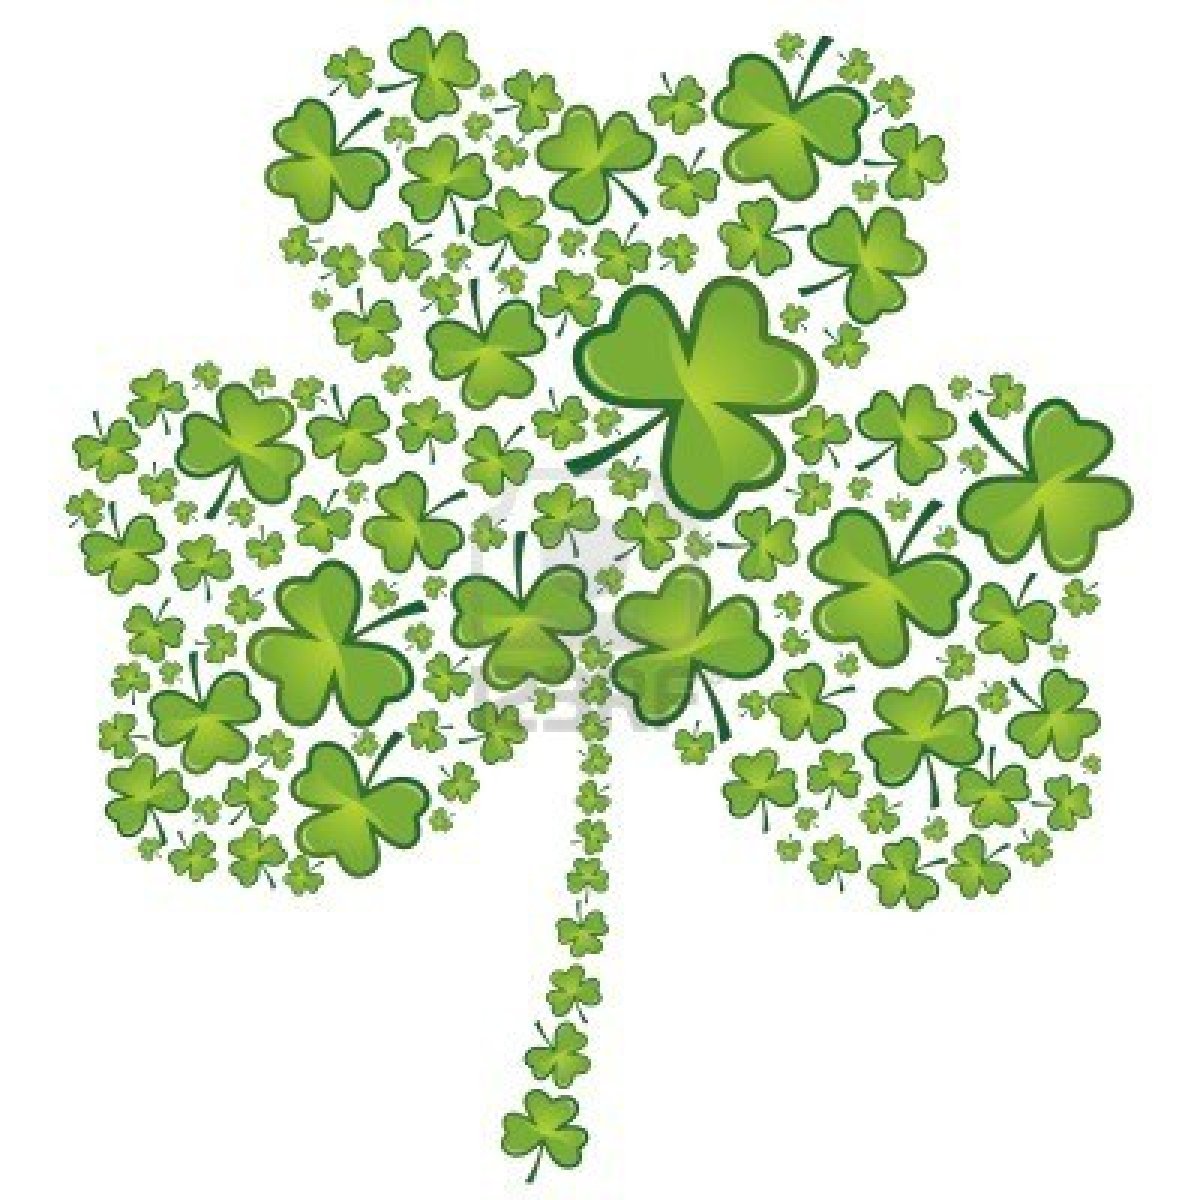 St Patty Day Images - ClipArt Best